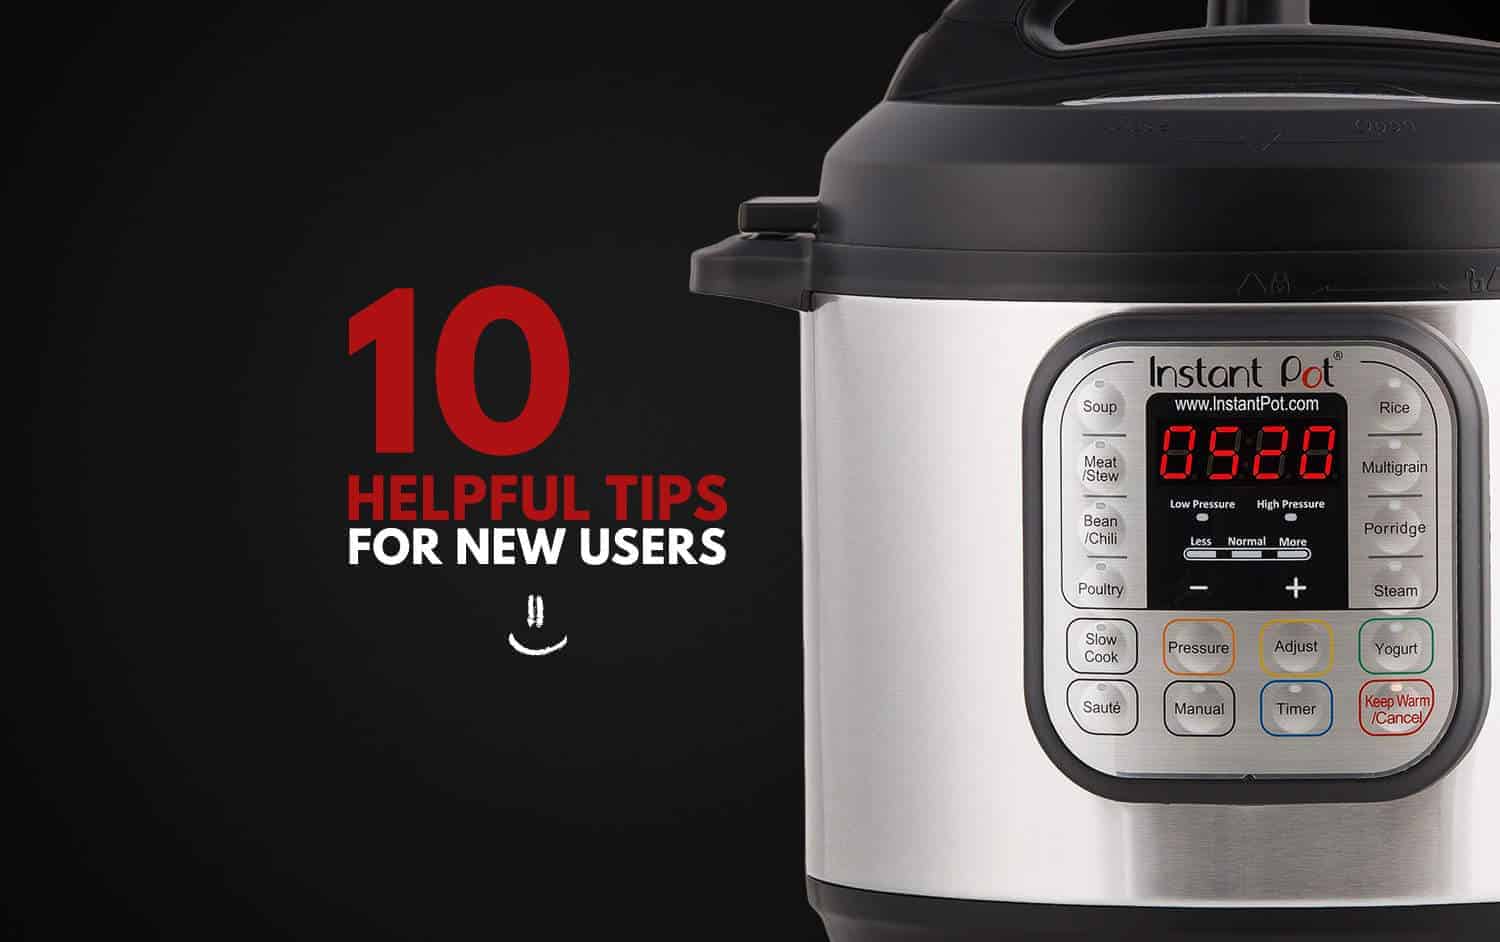 10 Helpful Tips For New Instant Pot Users to learn how to use their Instant Pot Electric Pressure Cooker. Including safety tips, releasing pressure, liquid usage, recipe adaptations.